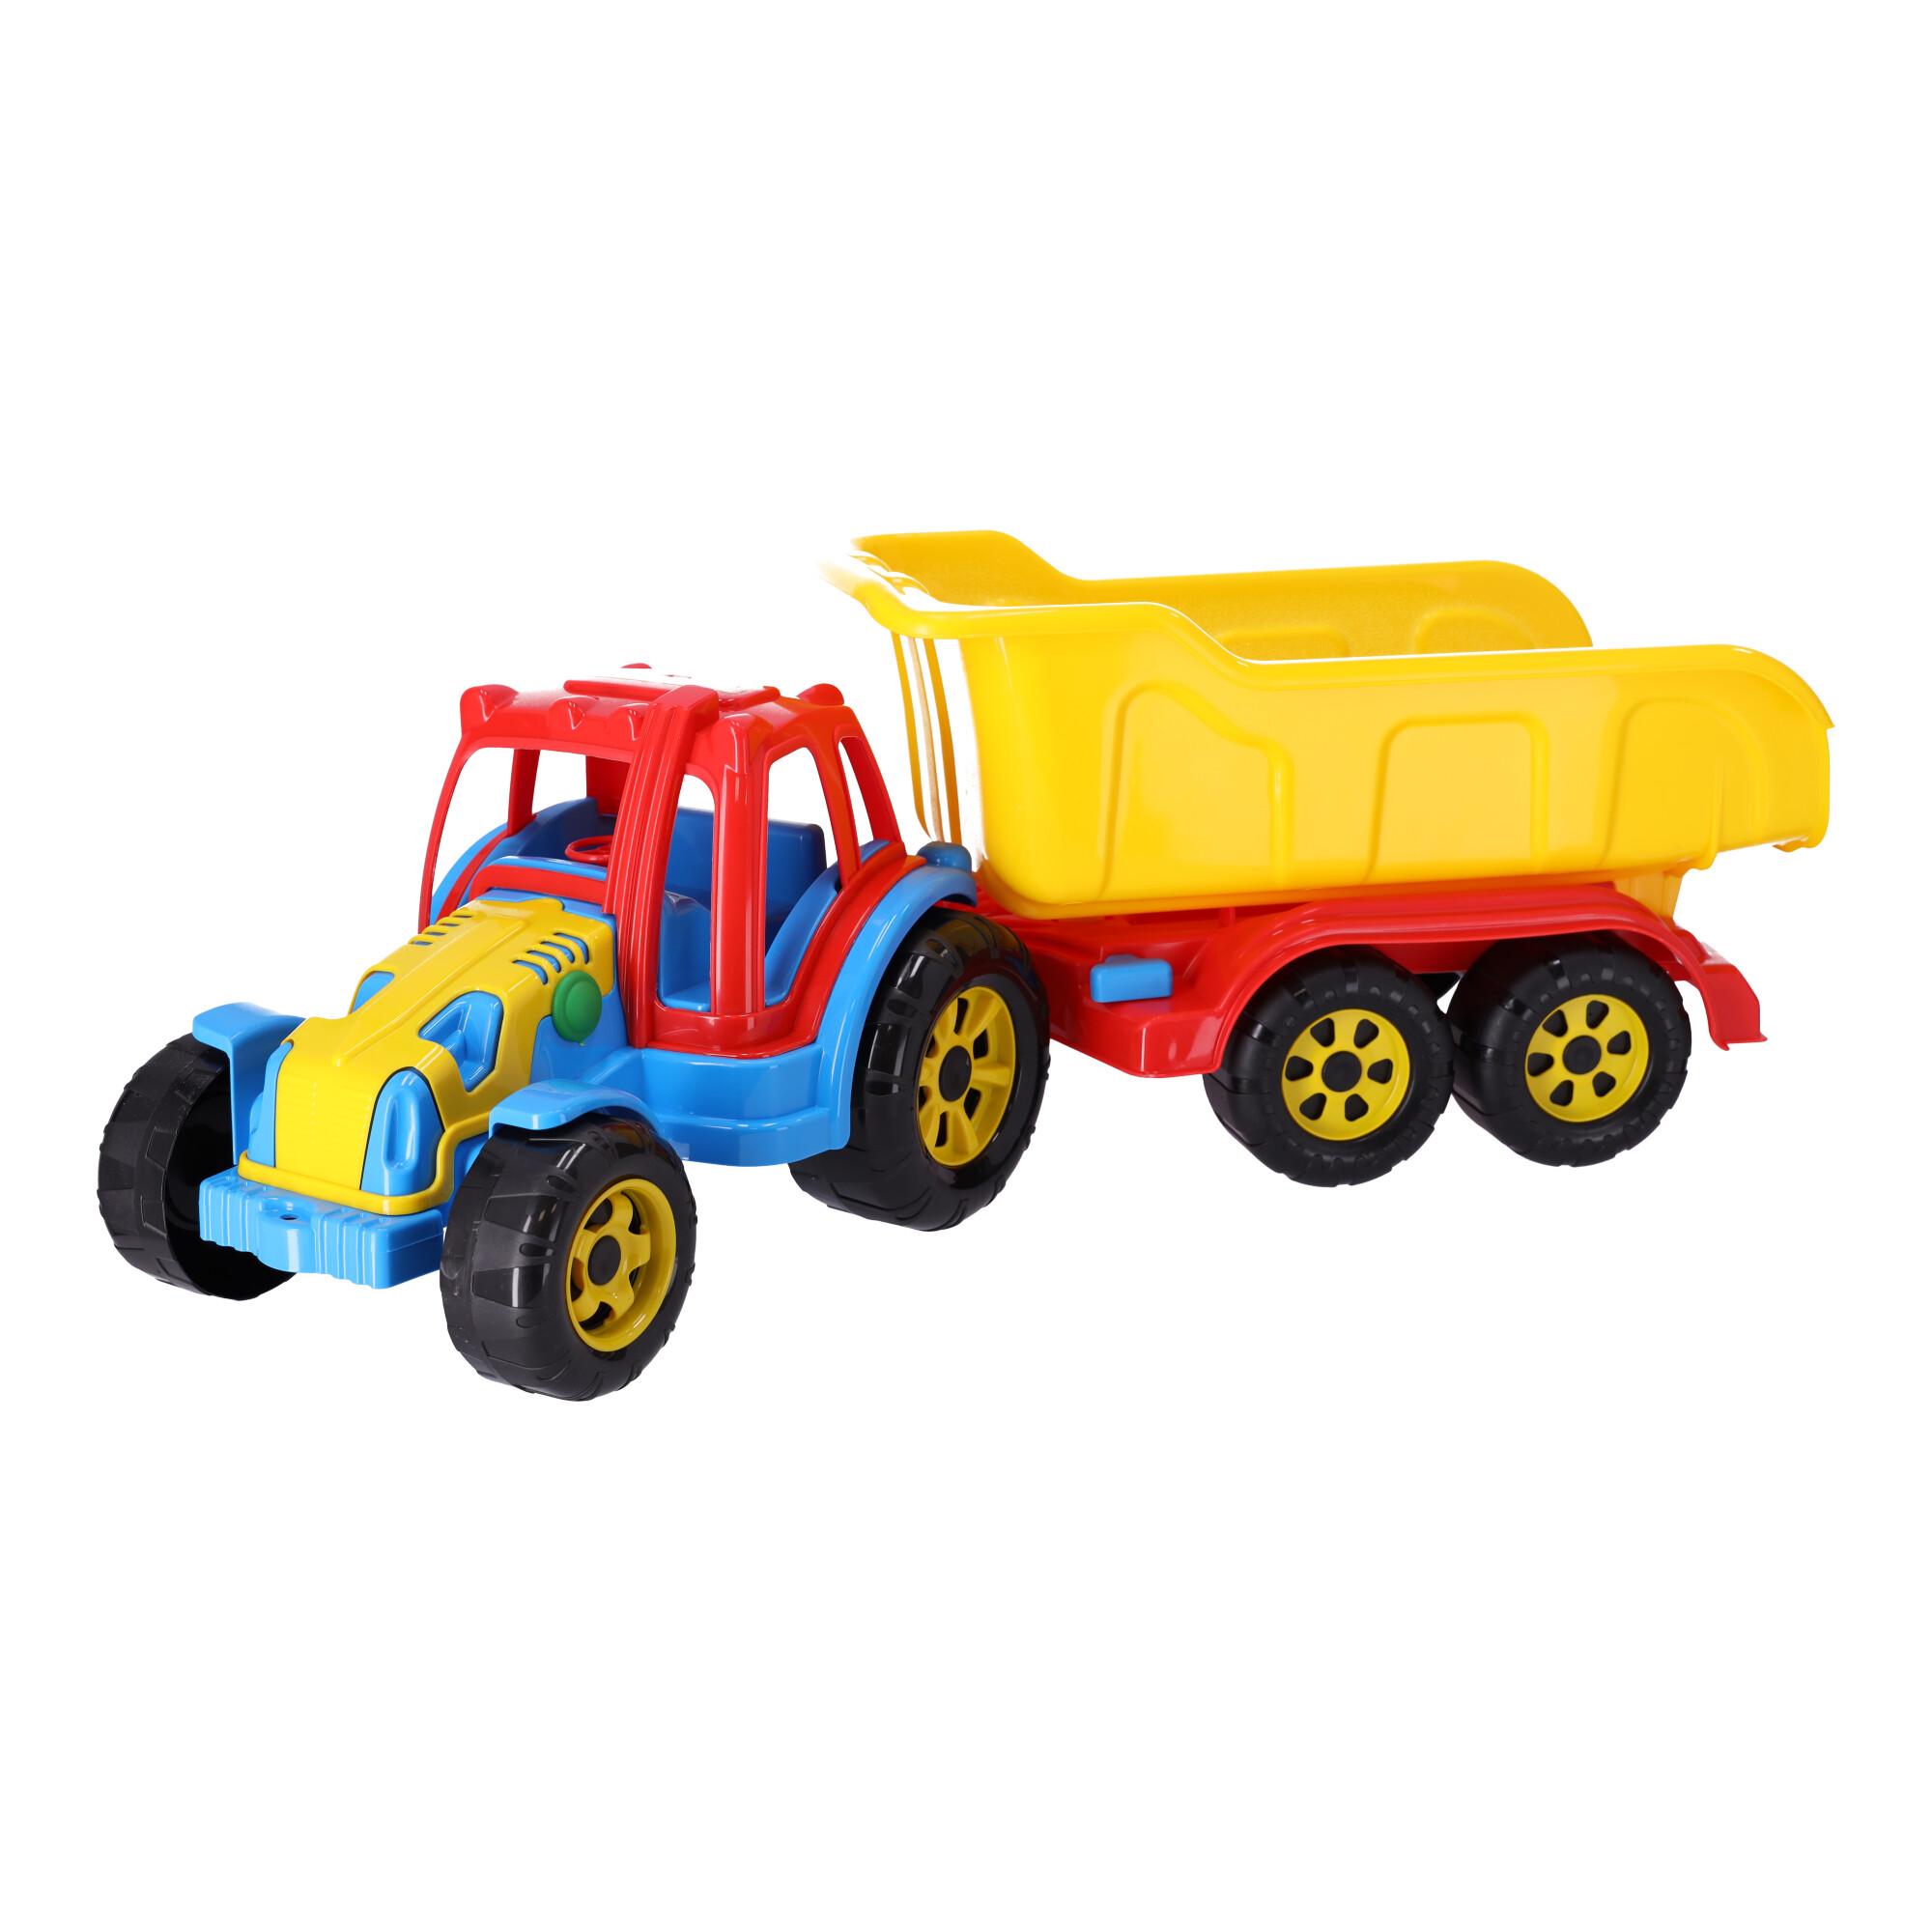 Tractor with trailer - model 343